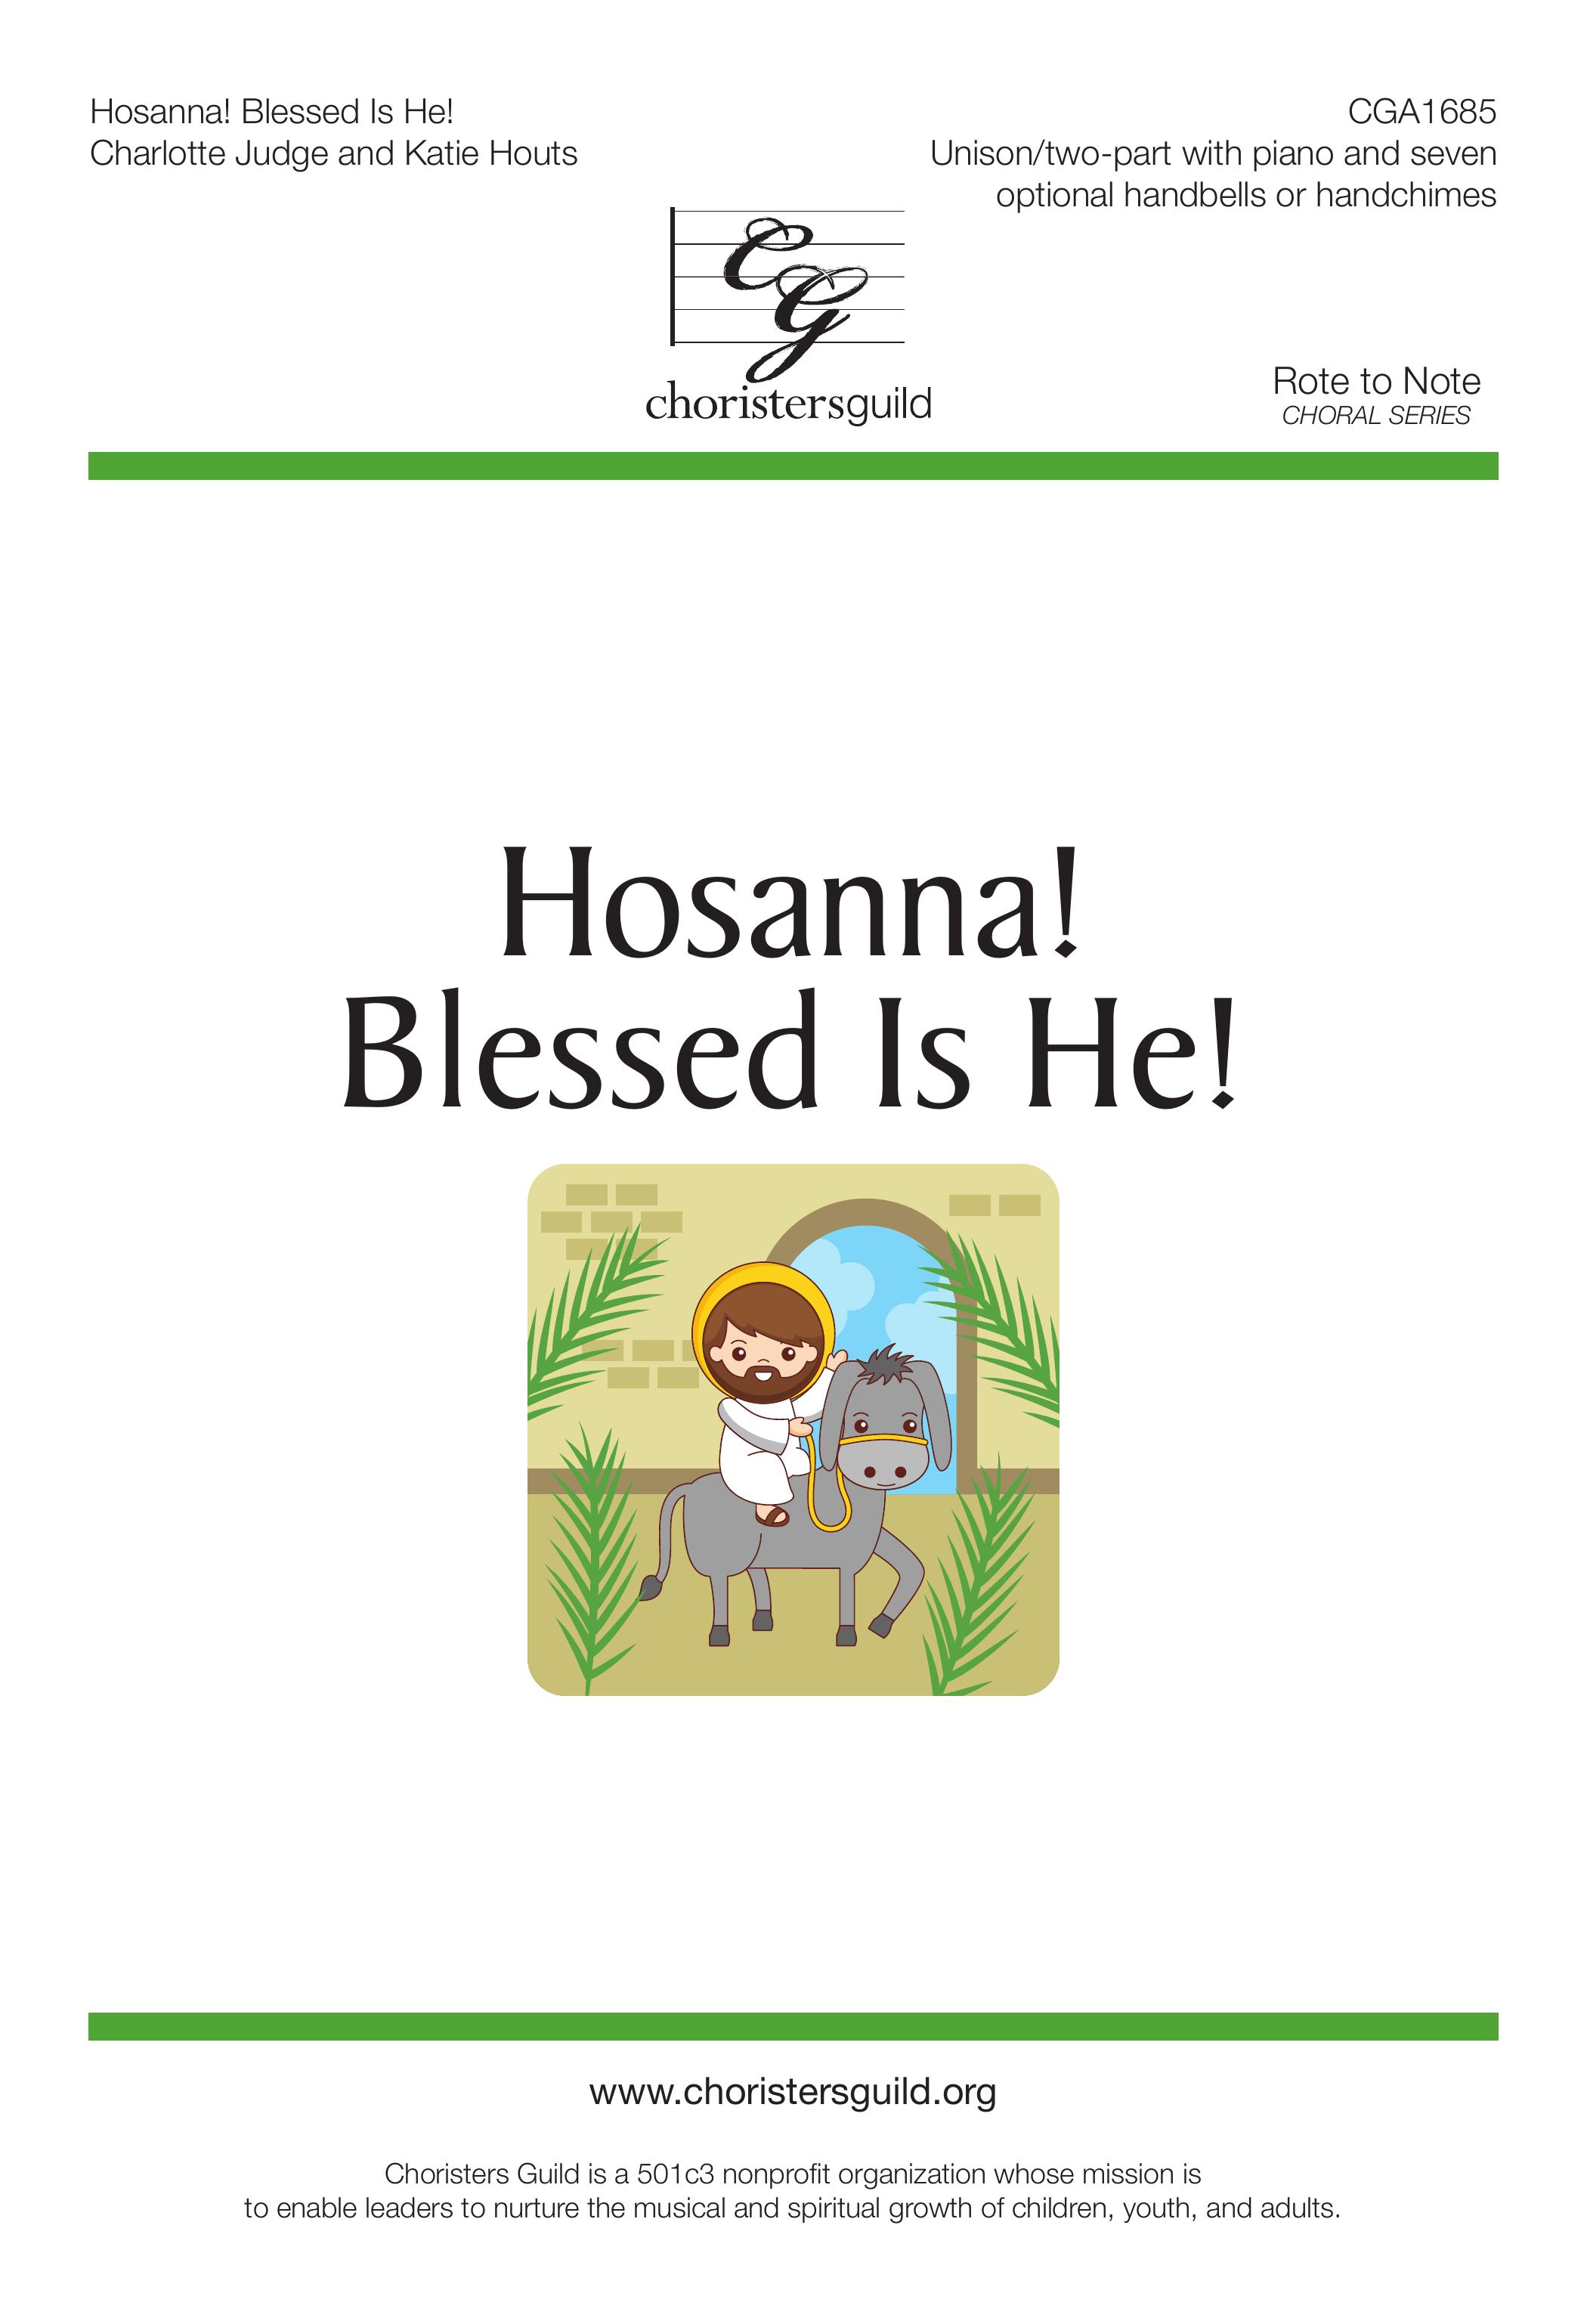 Hosanna Blessed Is He